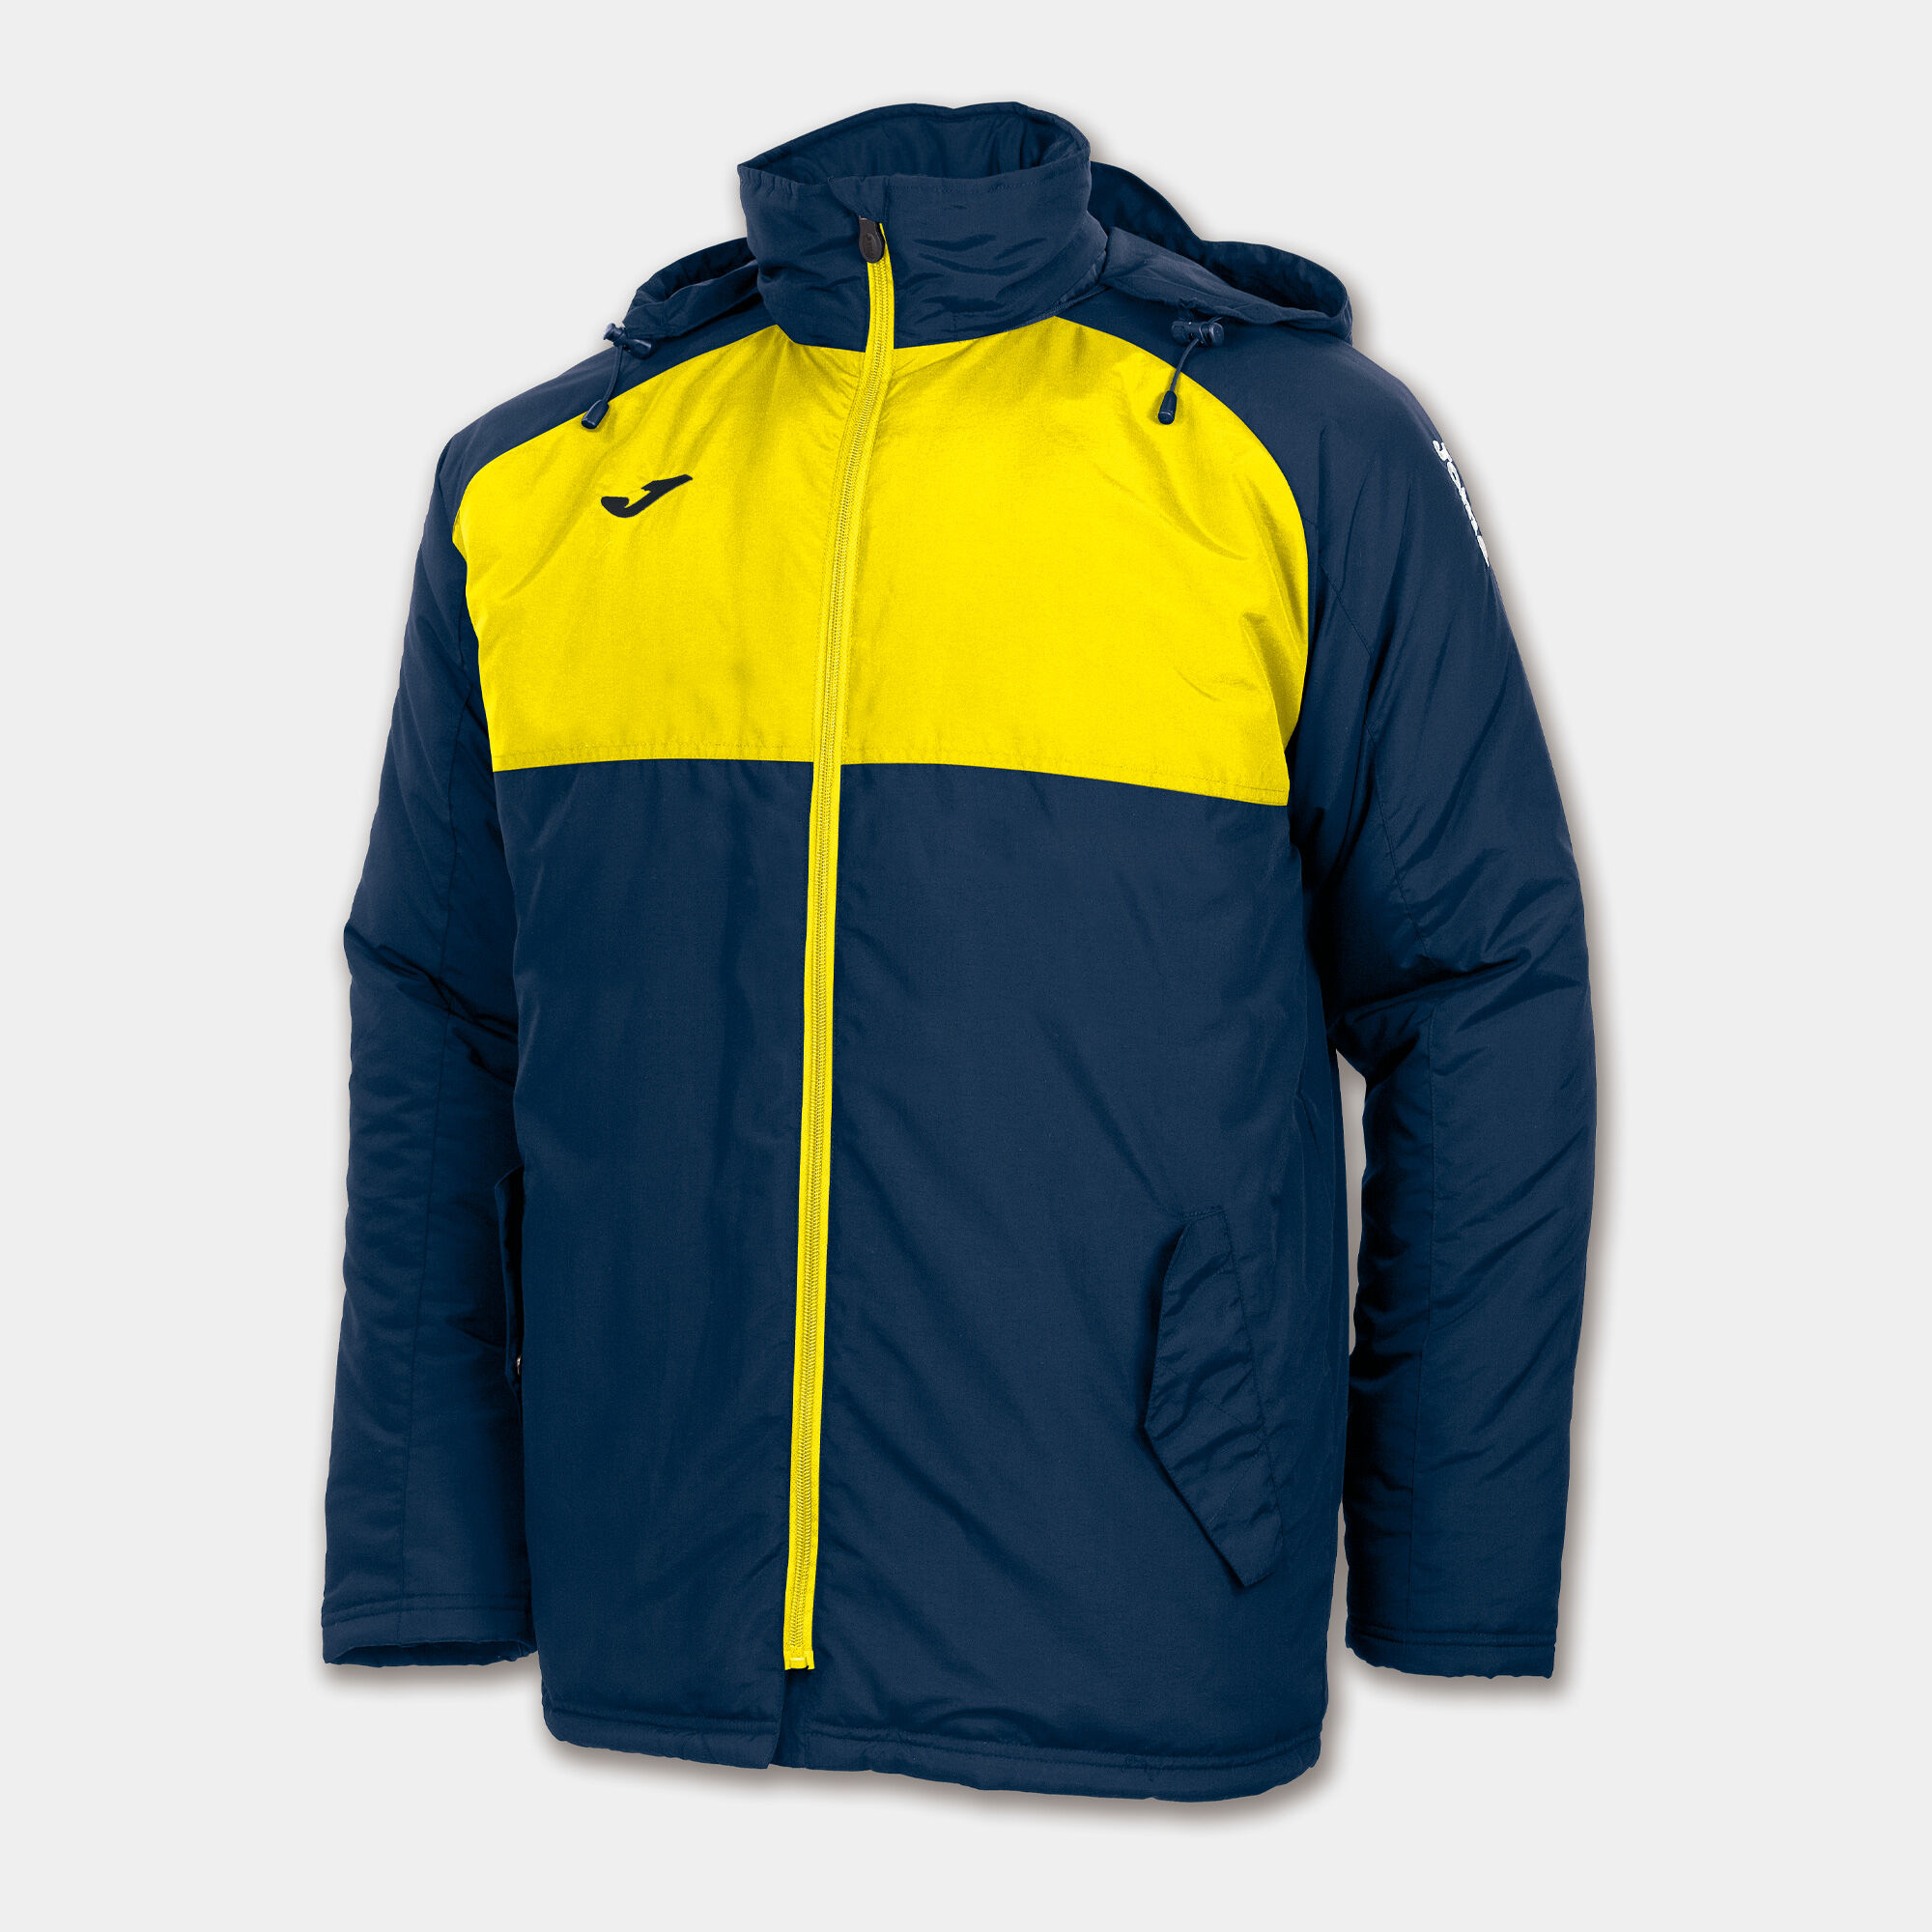 ANORAK MAN ANDES NAVY BLUE YELLOW